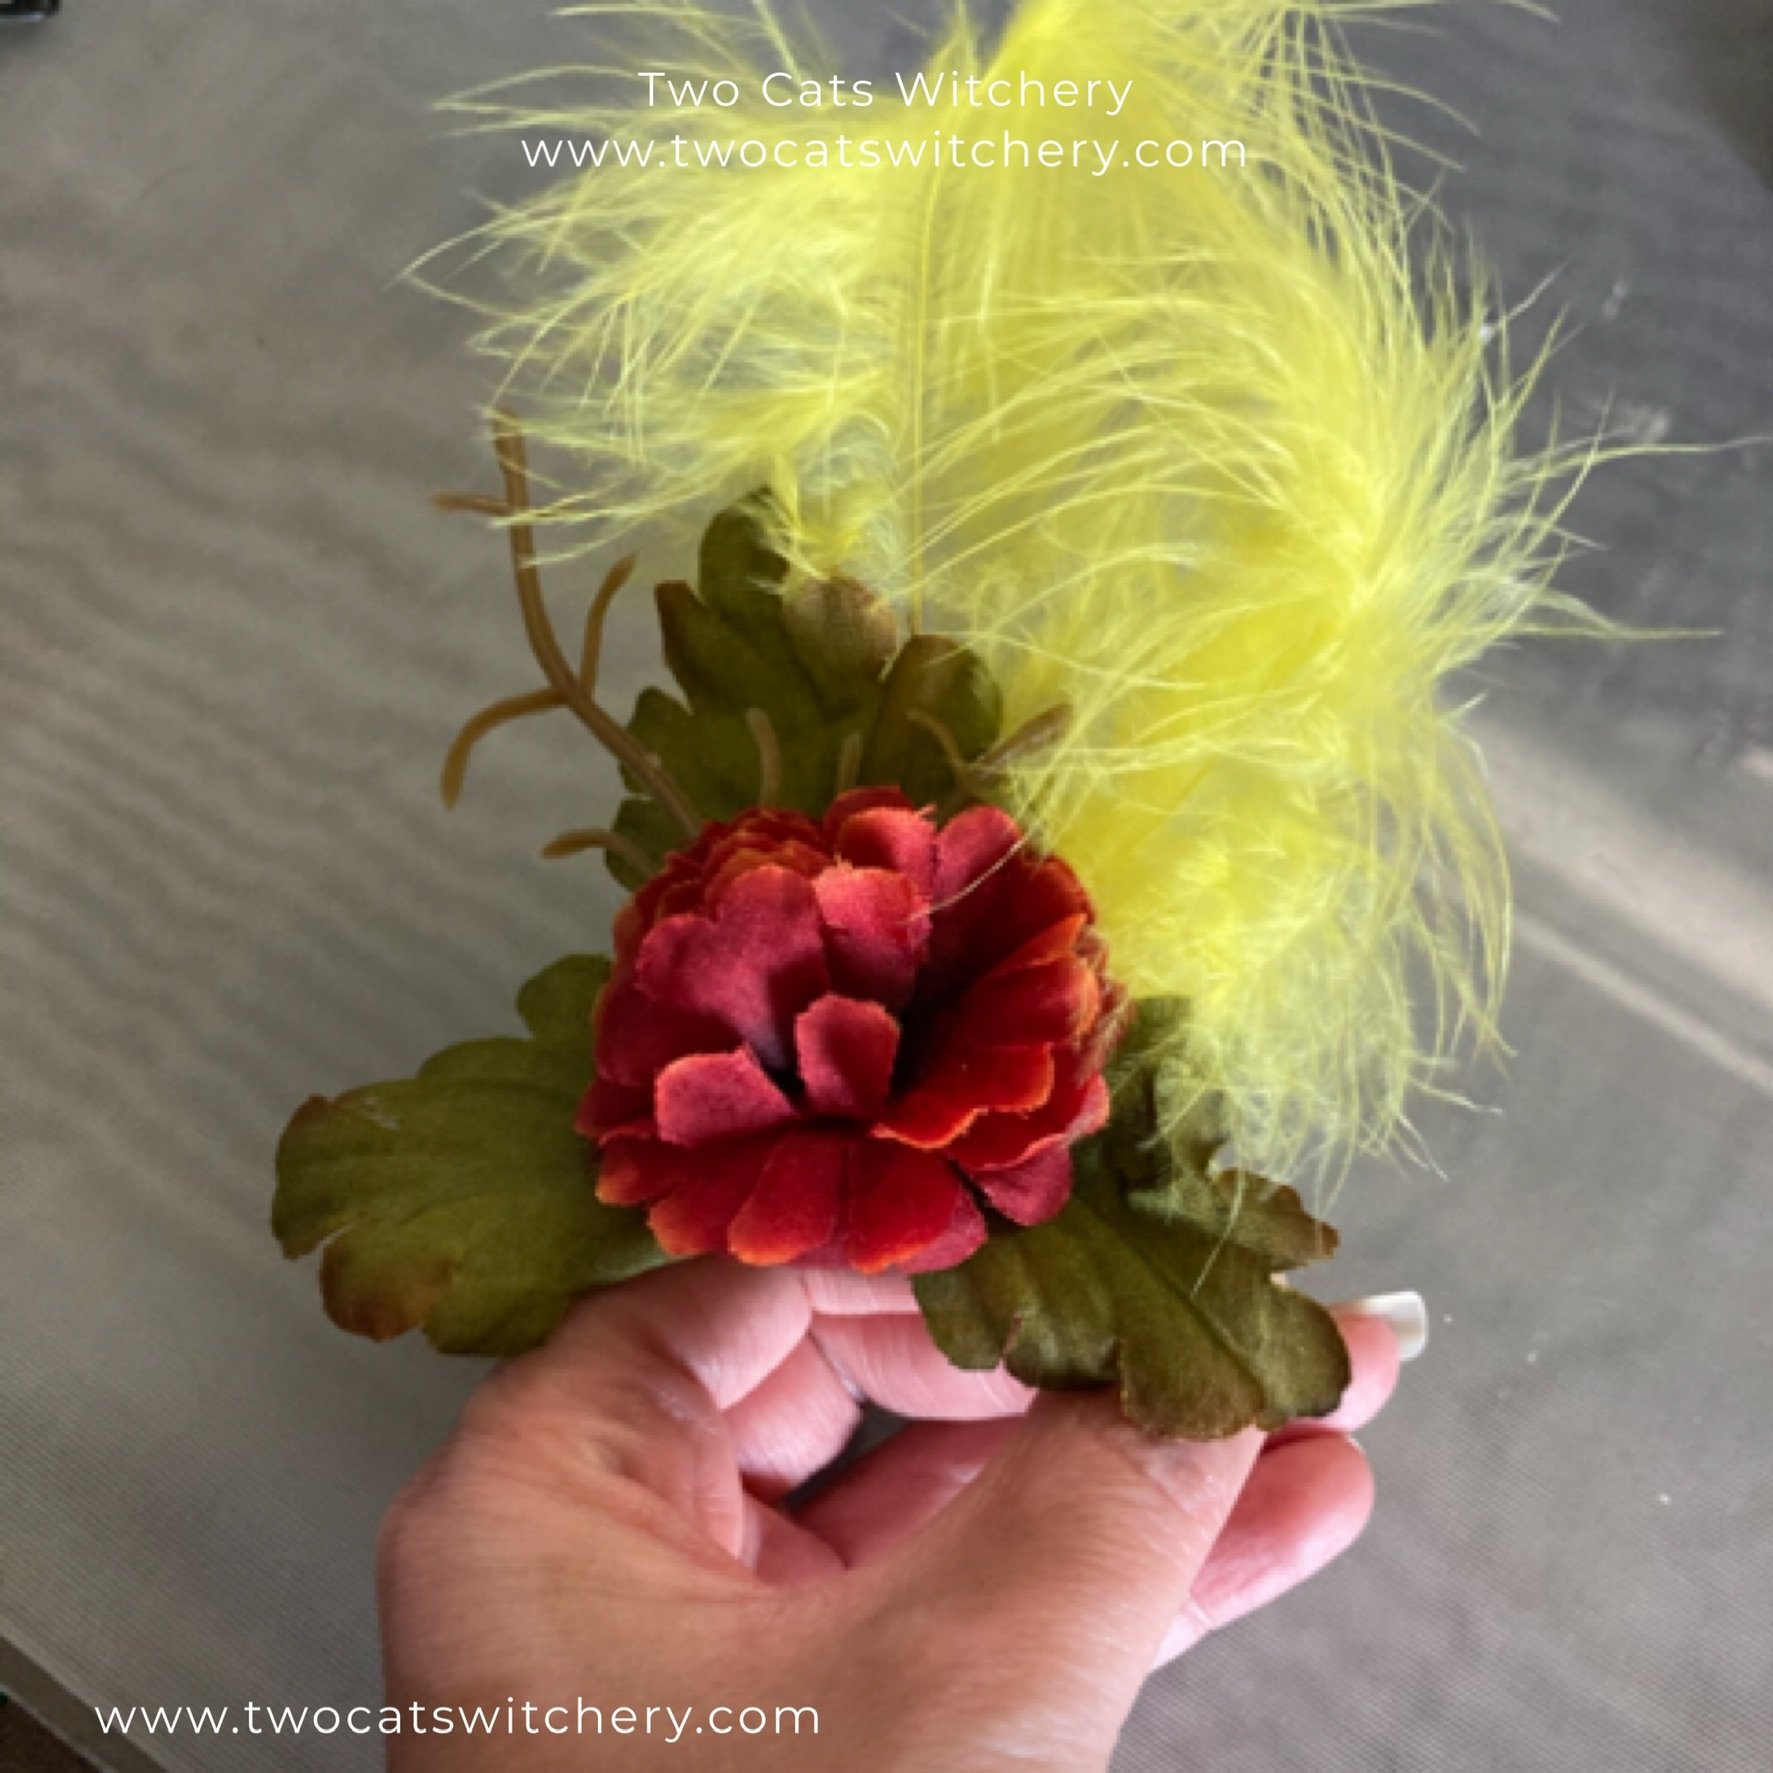 Handmade Vintage Inspired Hair Pin with Red Carnation, Green Leaves, and Yellow Faux Feathers